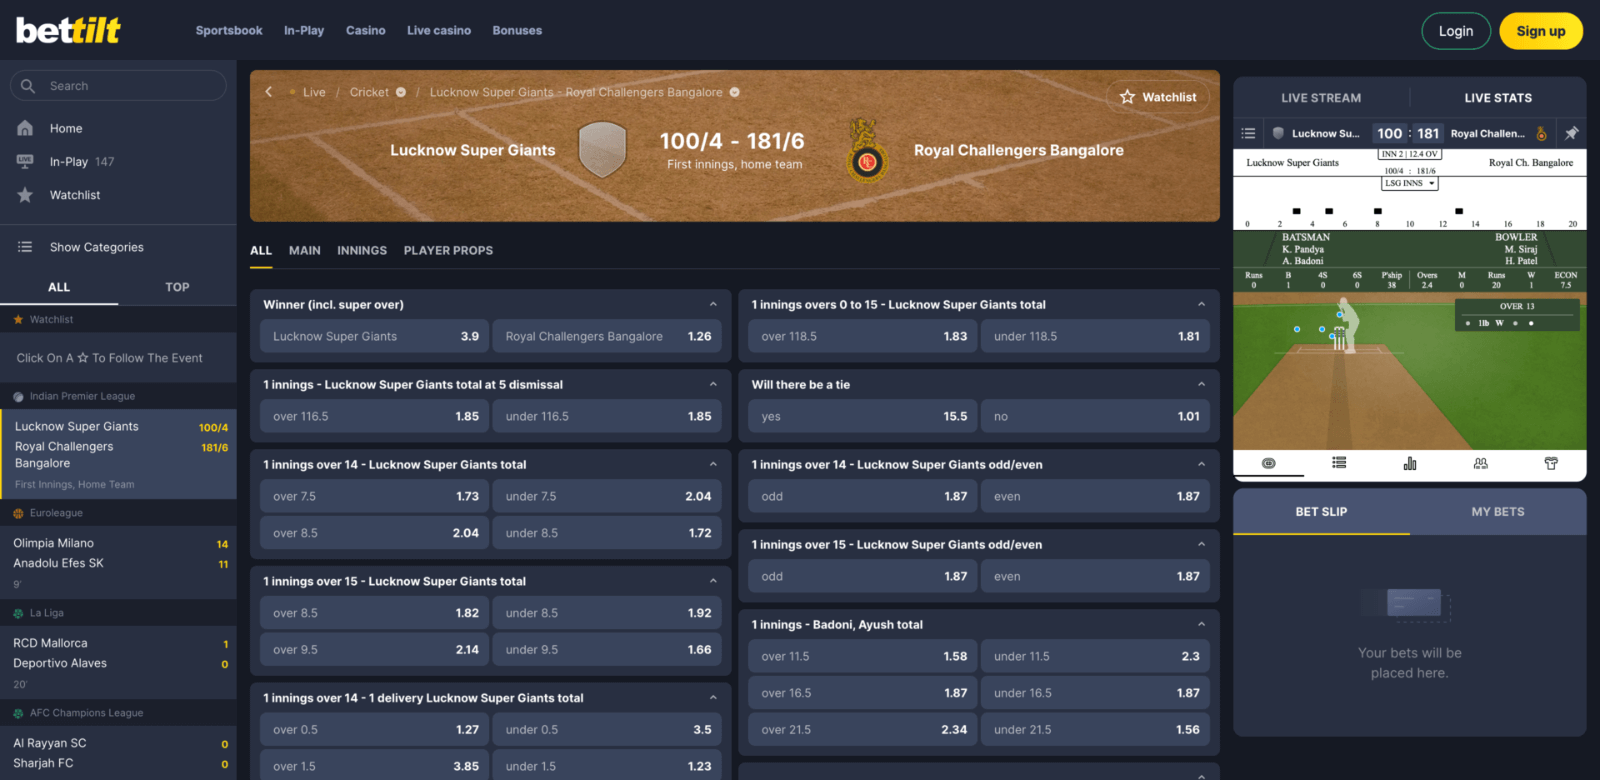 page with the selected match, its bets and odds